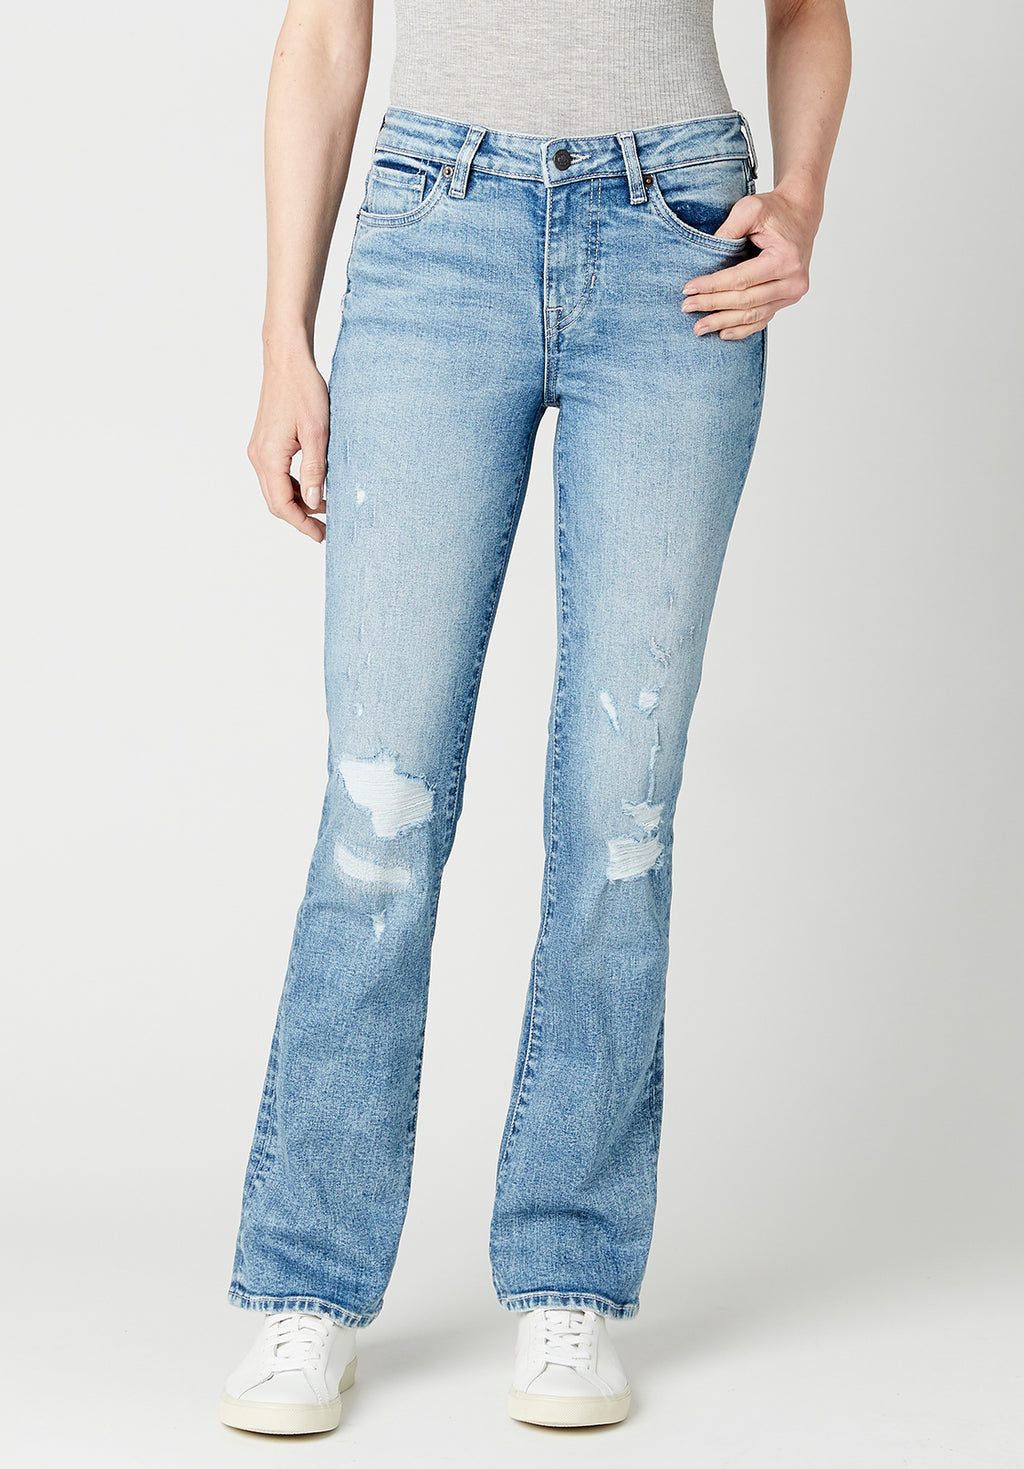 Maddie Mid Rise Bootcut Faded Jeans, Denim